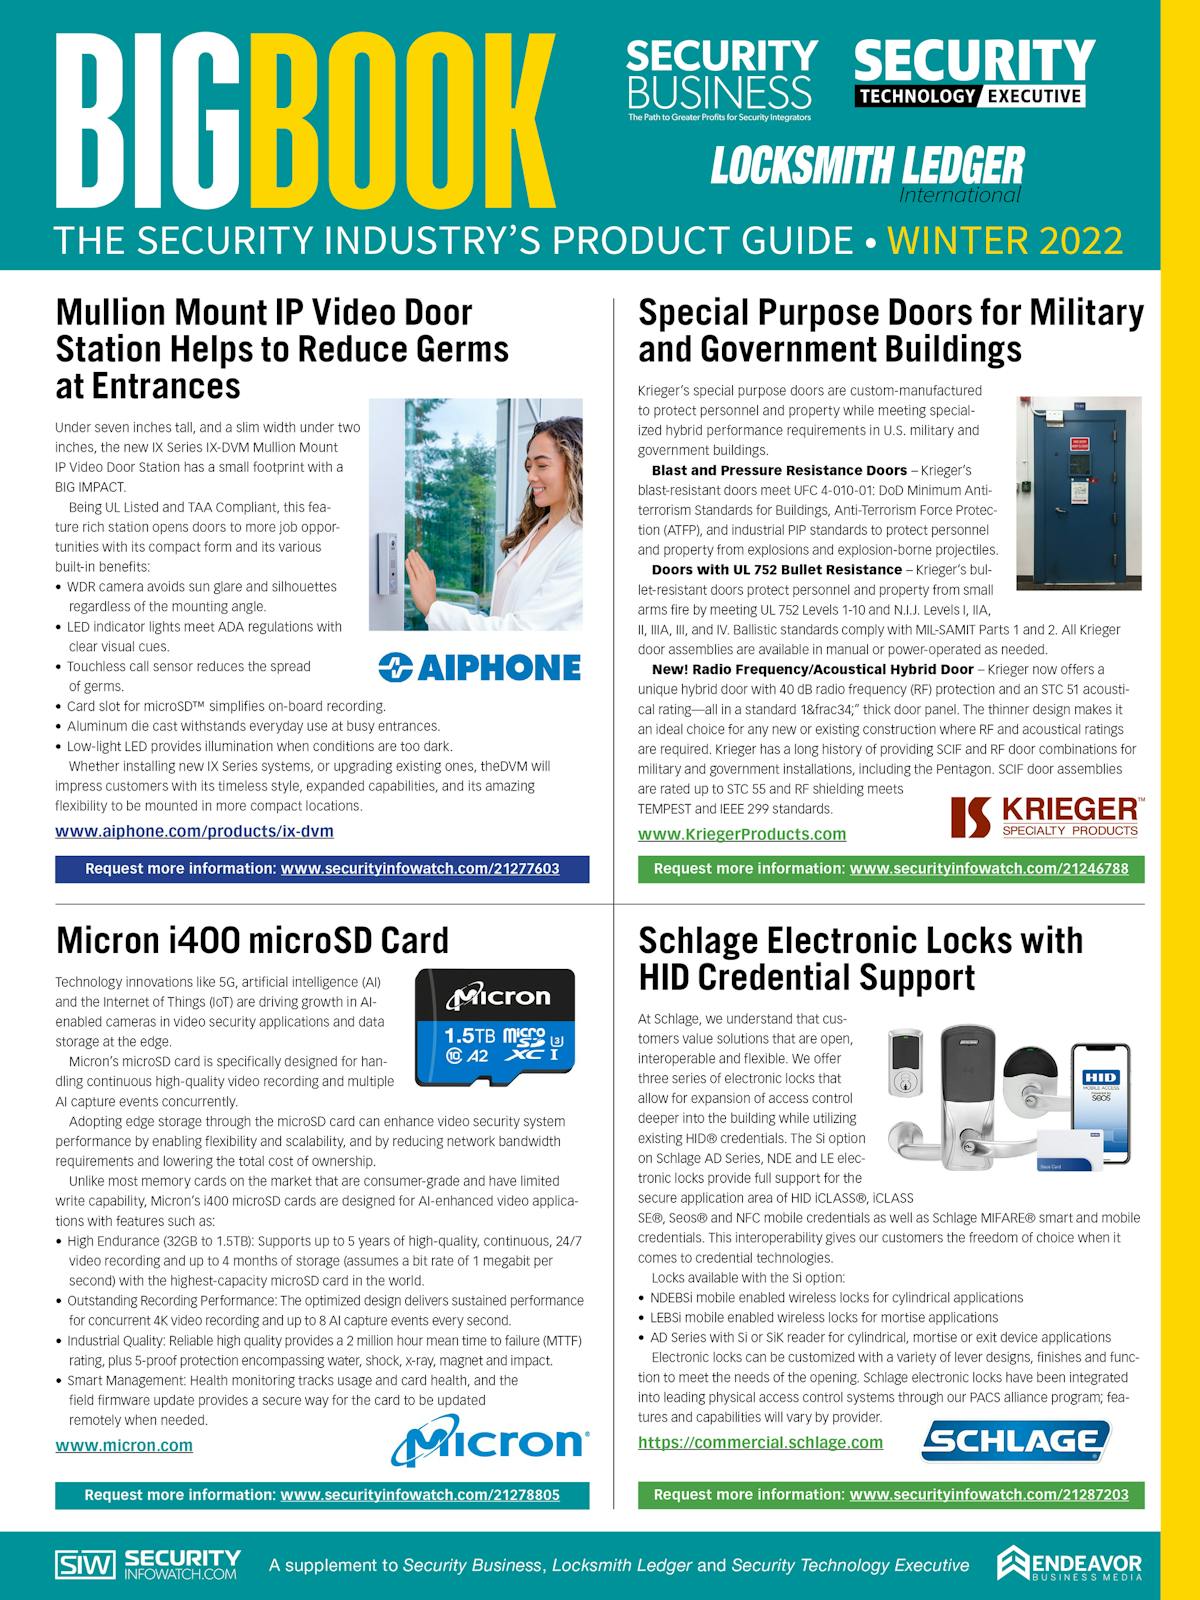 The Winter 2022 BIG BOOK product guide is a bonus publication to Security Business magazine, Security Technology Executive magazine and Locksmith Ledger International.